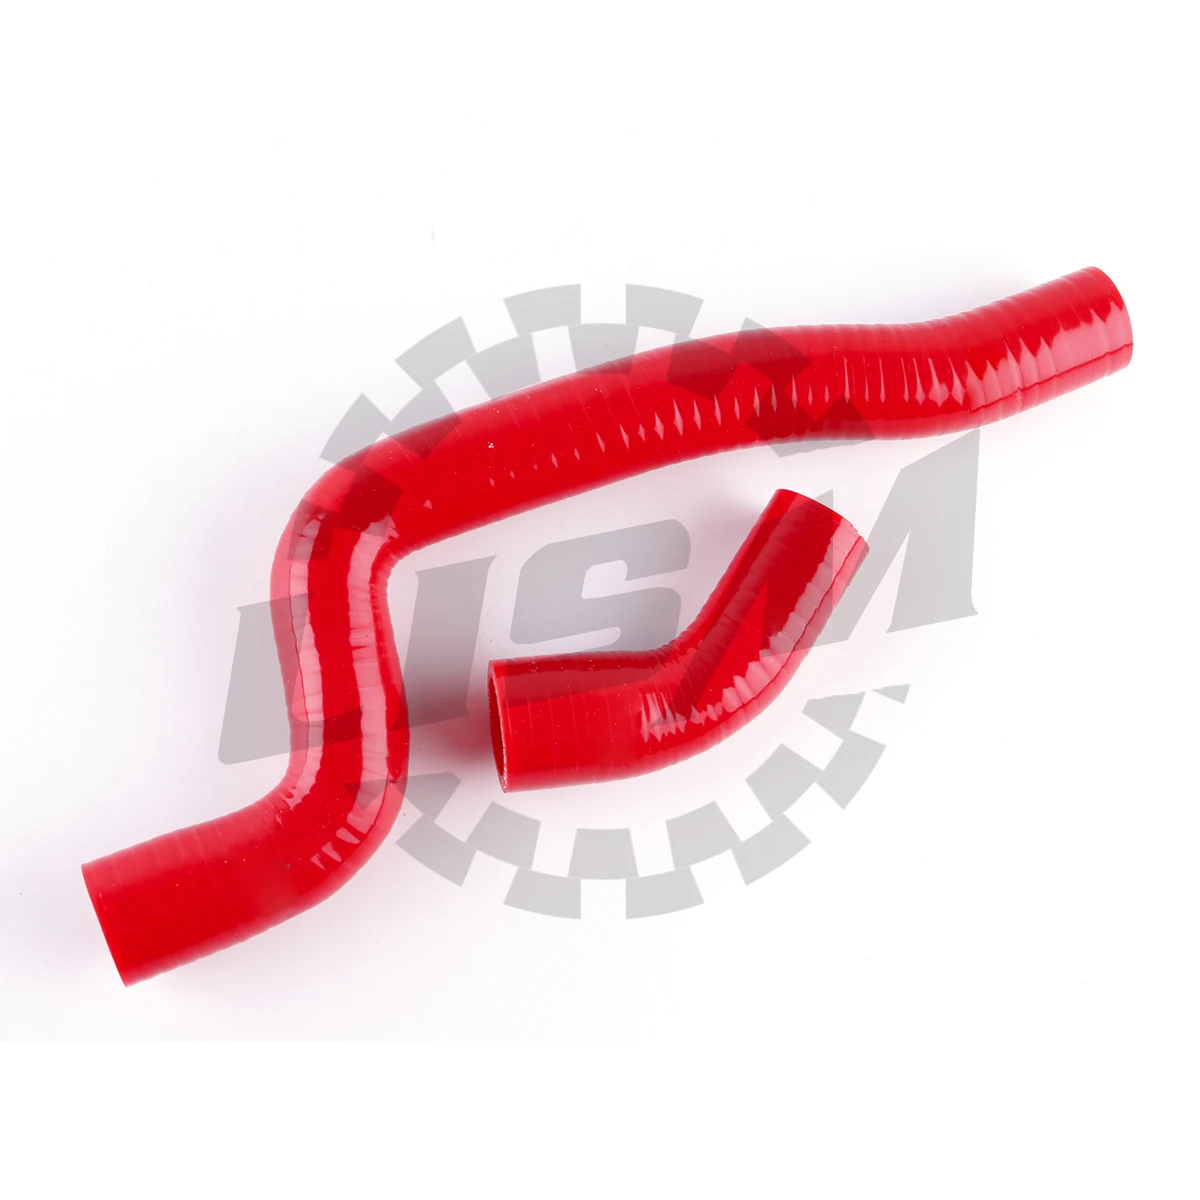 

2PCS For Yamaha Raptor 660R YFM660R 2001-2005 2002 2003 2004 3-ply Silicone Radiator Coolant Hose Upper and Lower